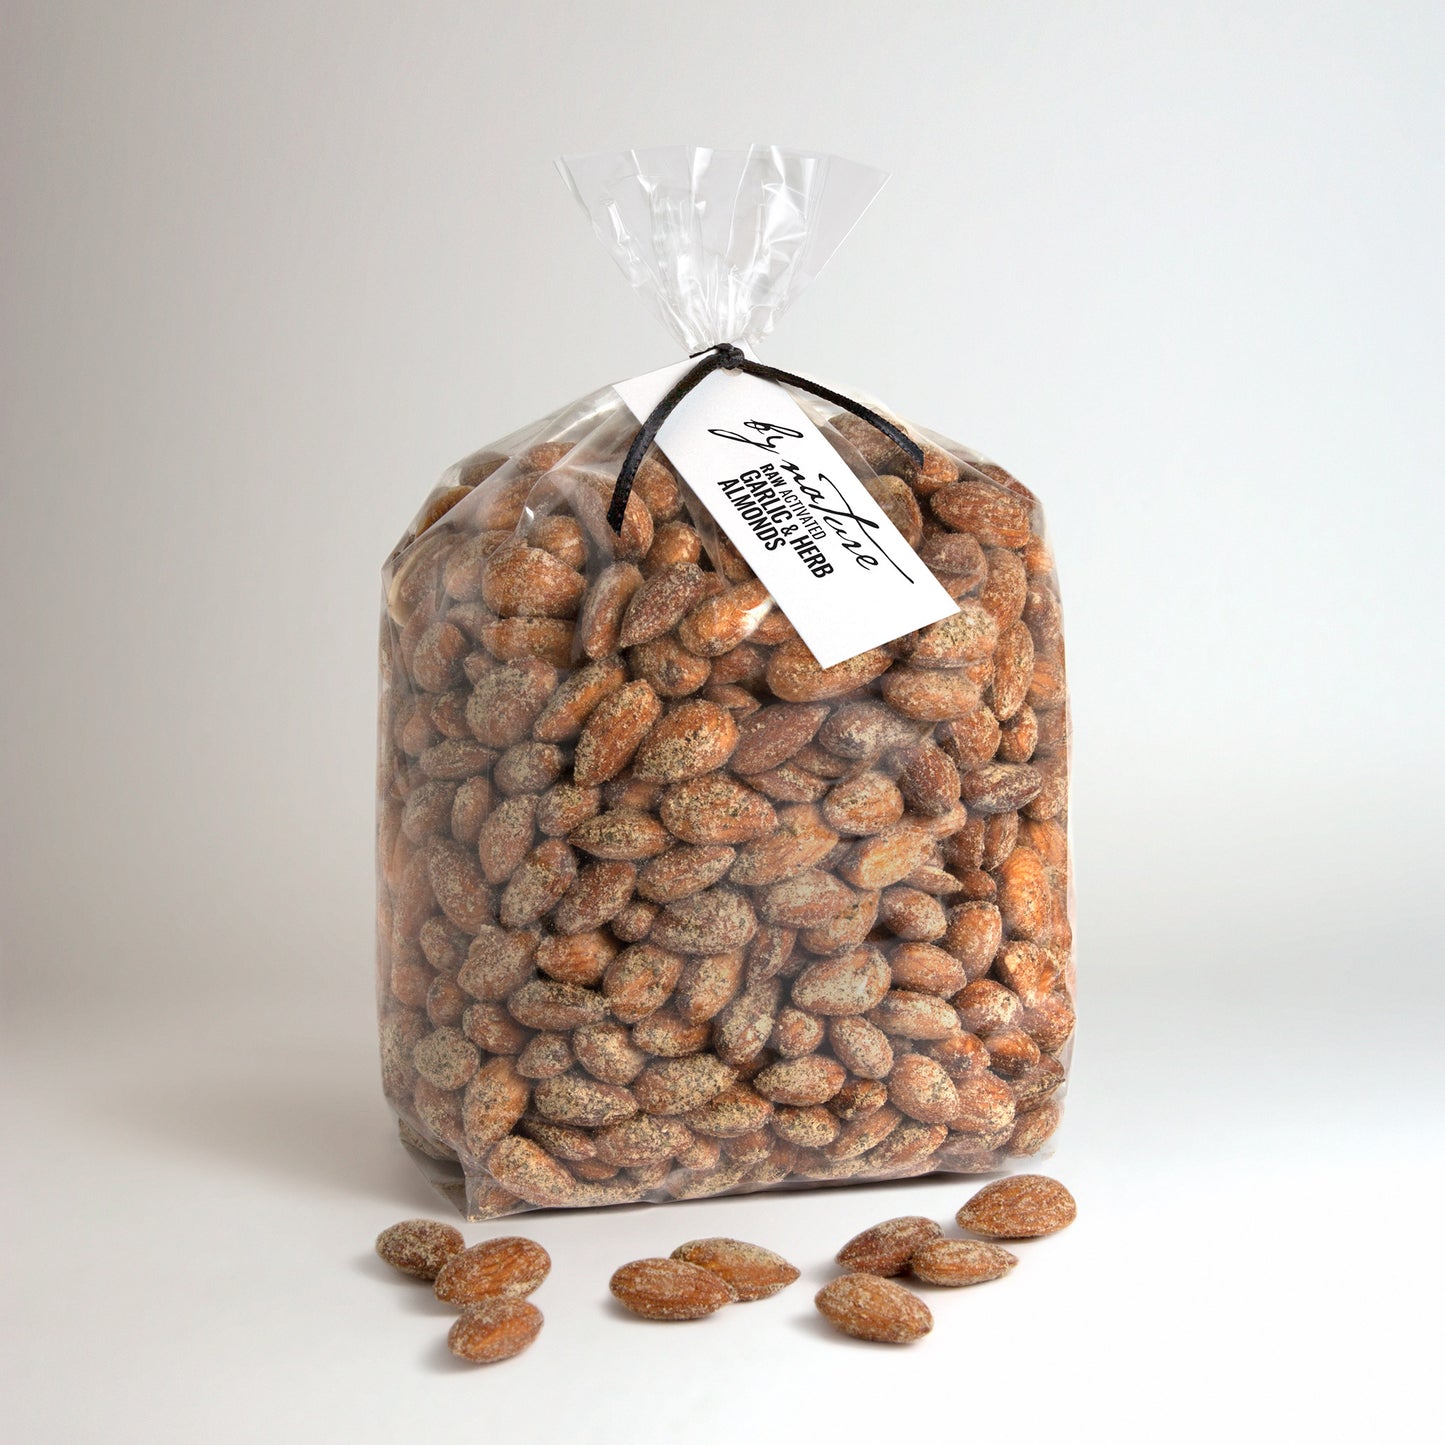 BY NATURE Garlic & Herb Almonds, 1kg - raw, activated, dried not roasted.